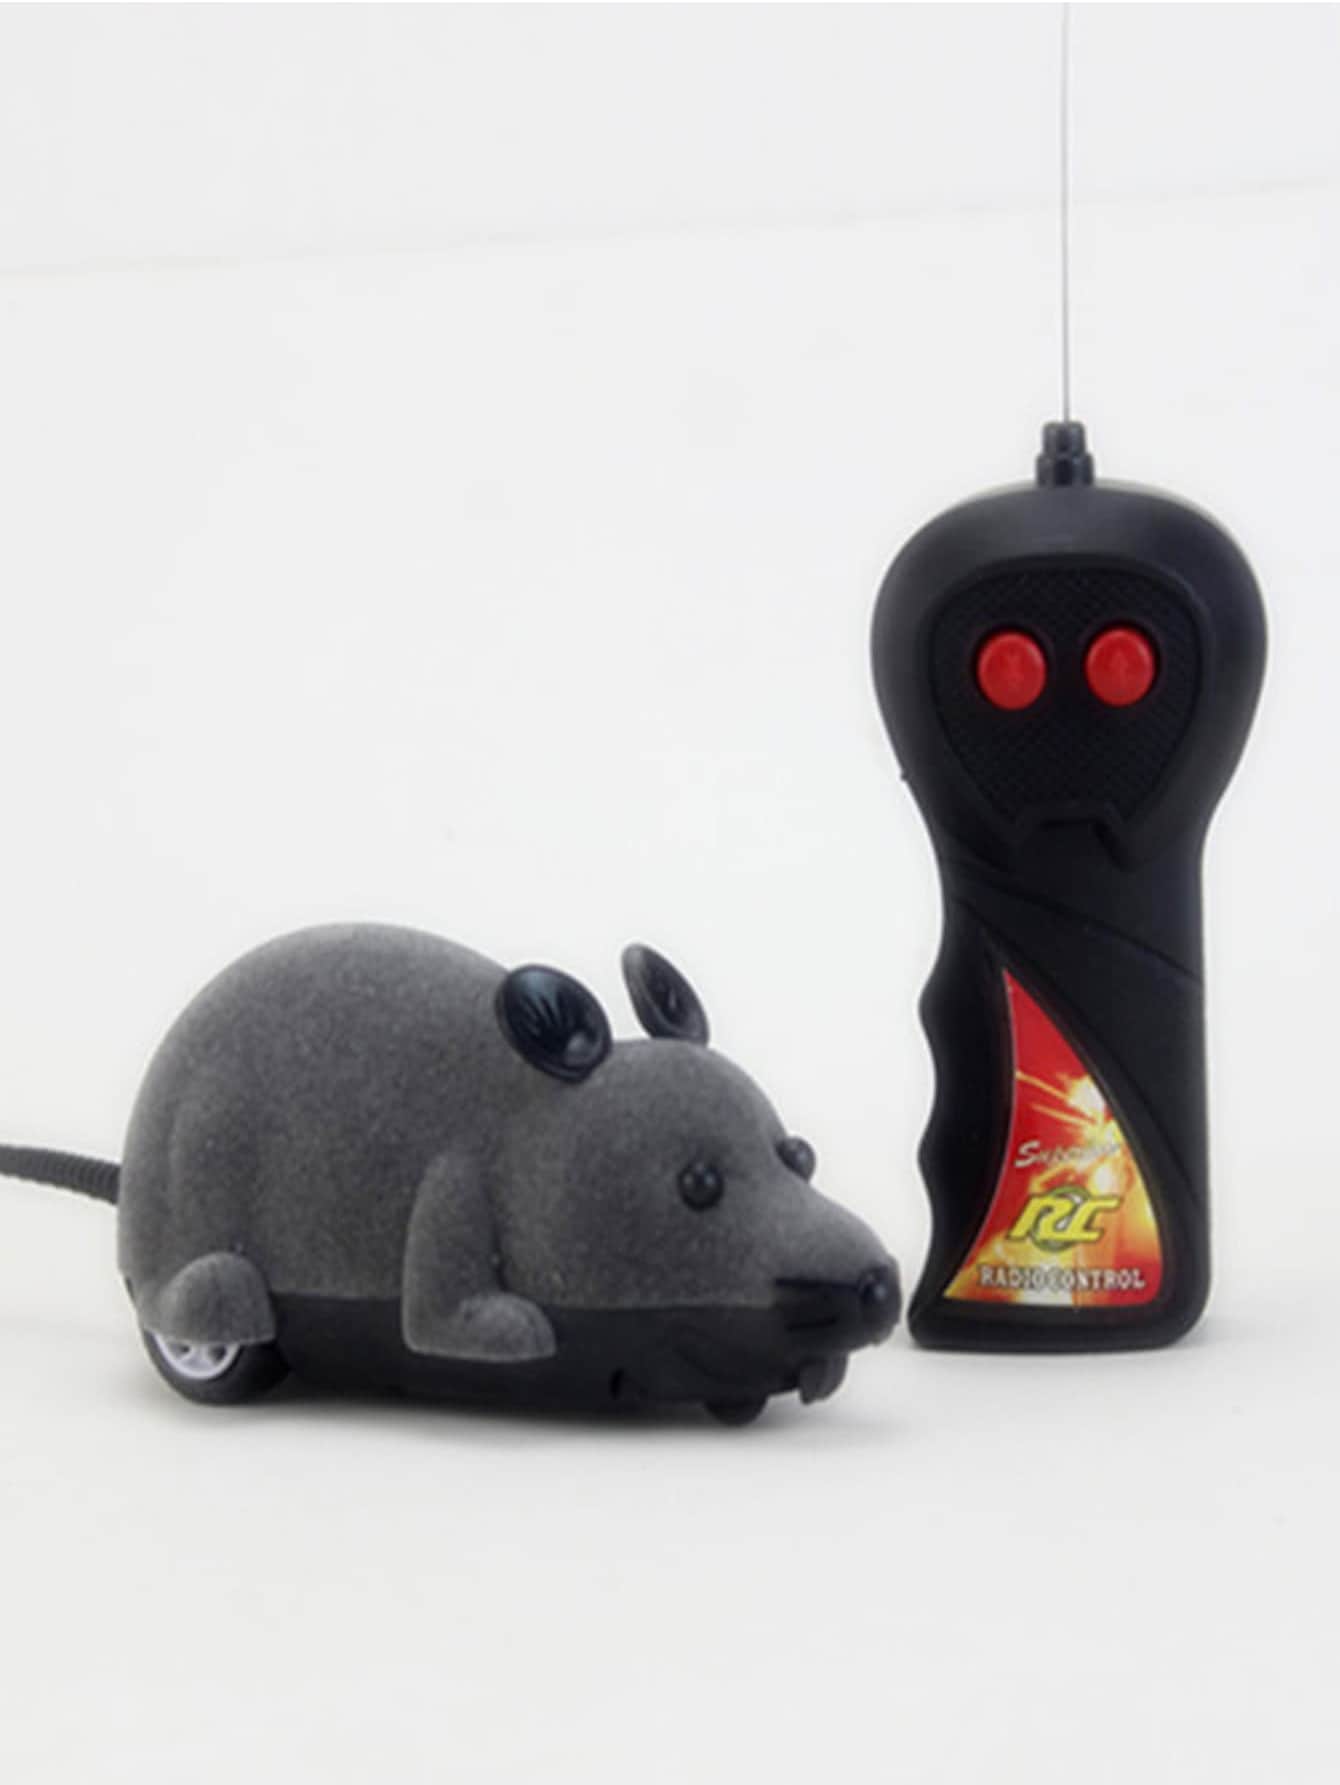 1pc Remote Control Mouse Design Interactive Cat Toy For Dog And Cat For Play